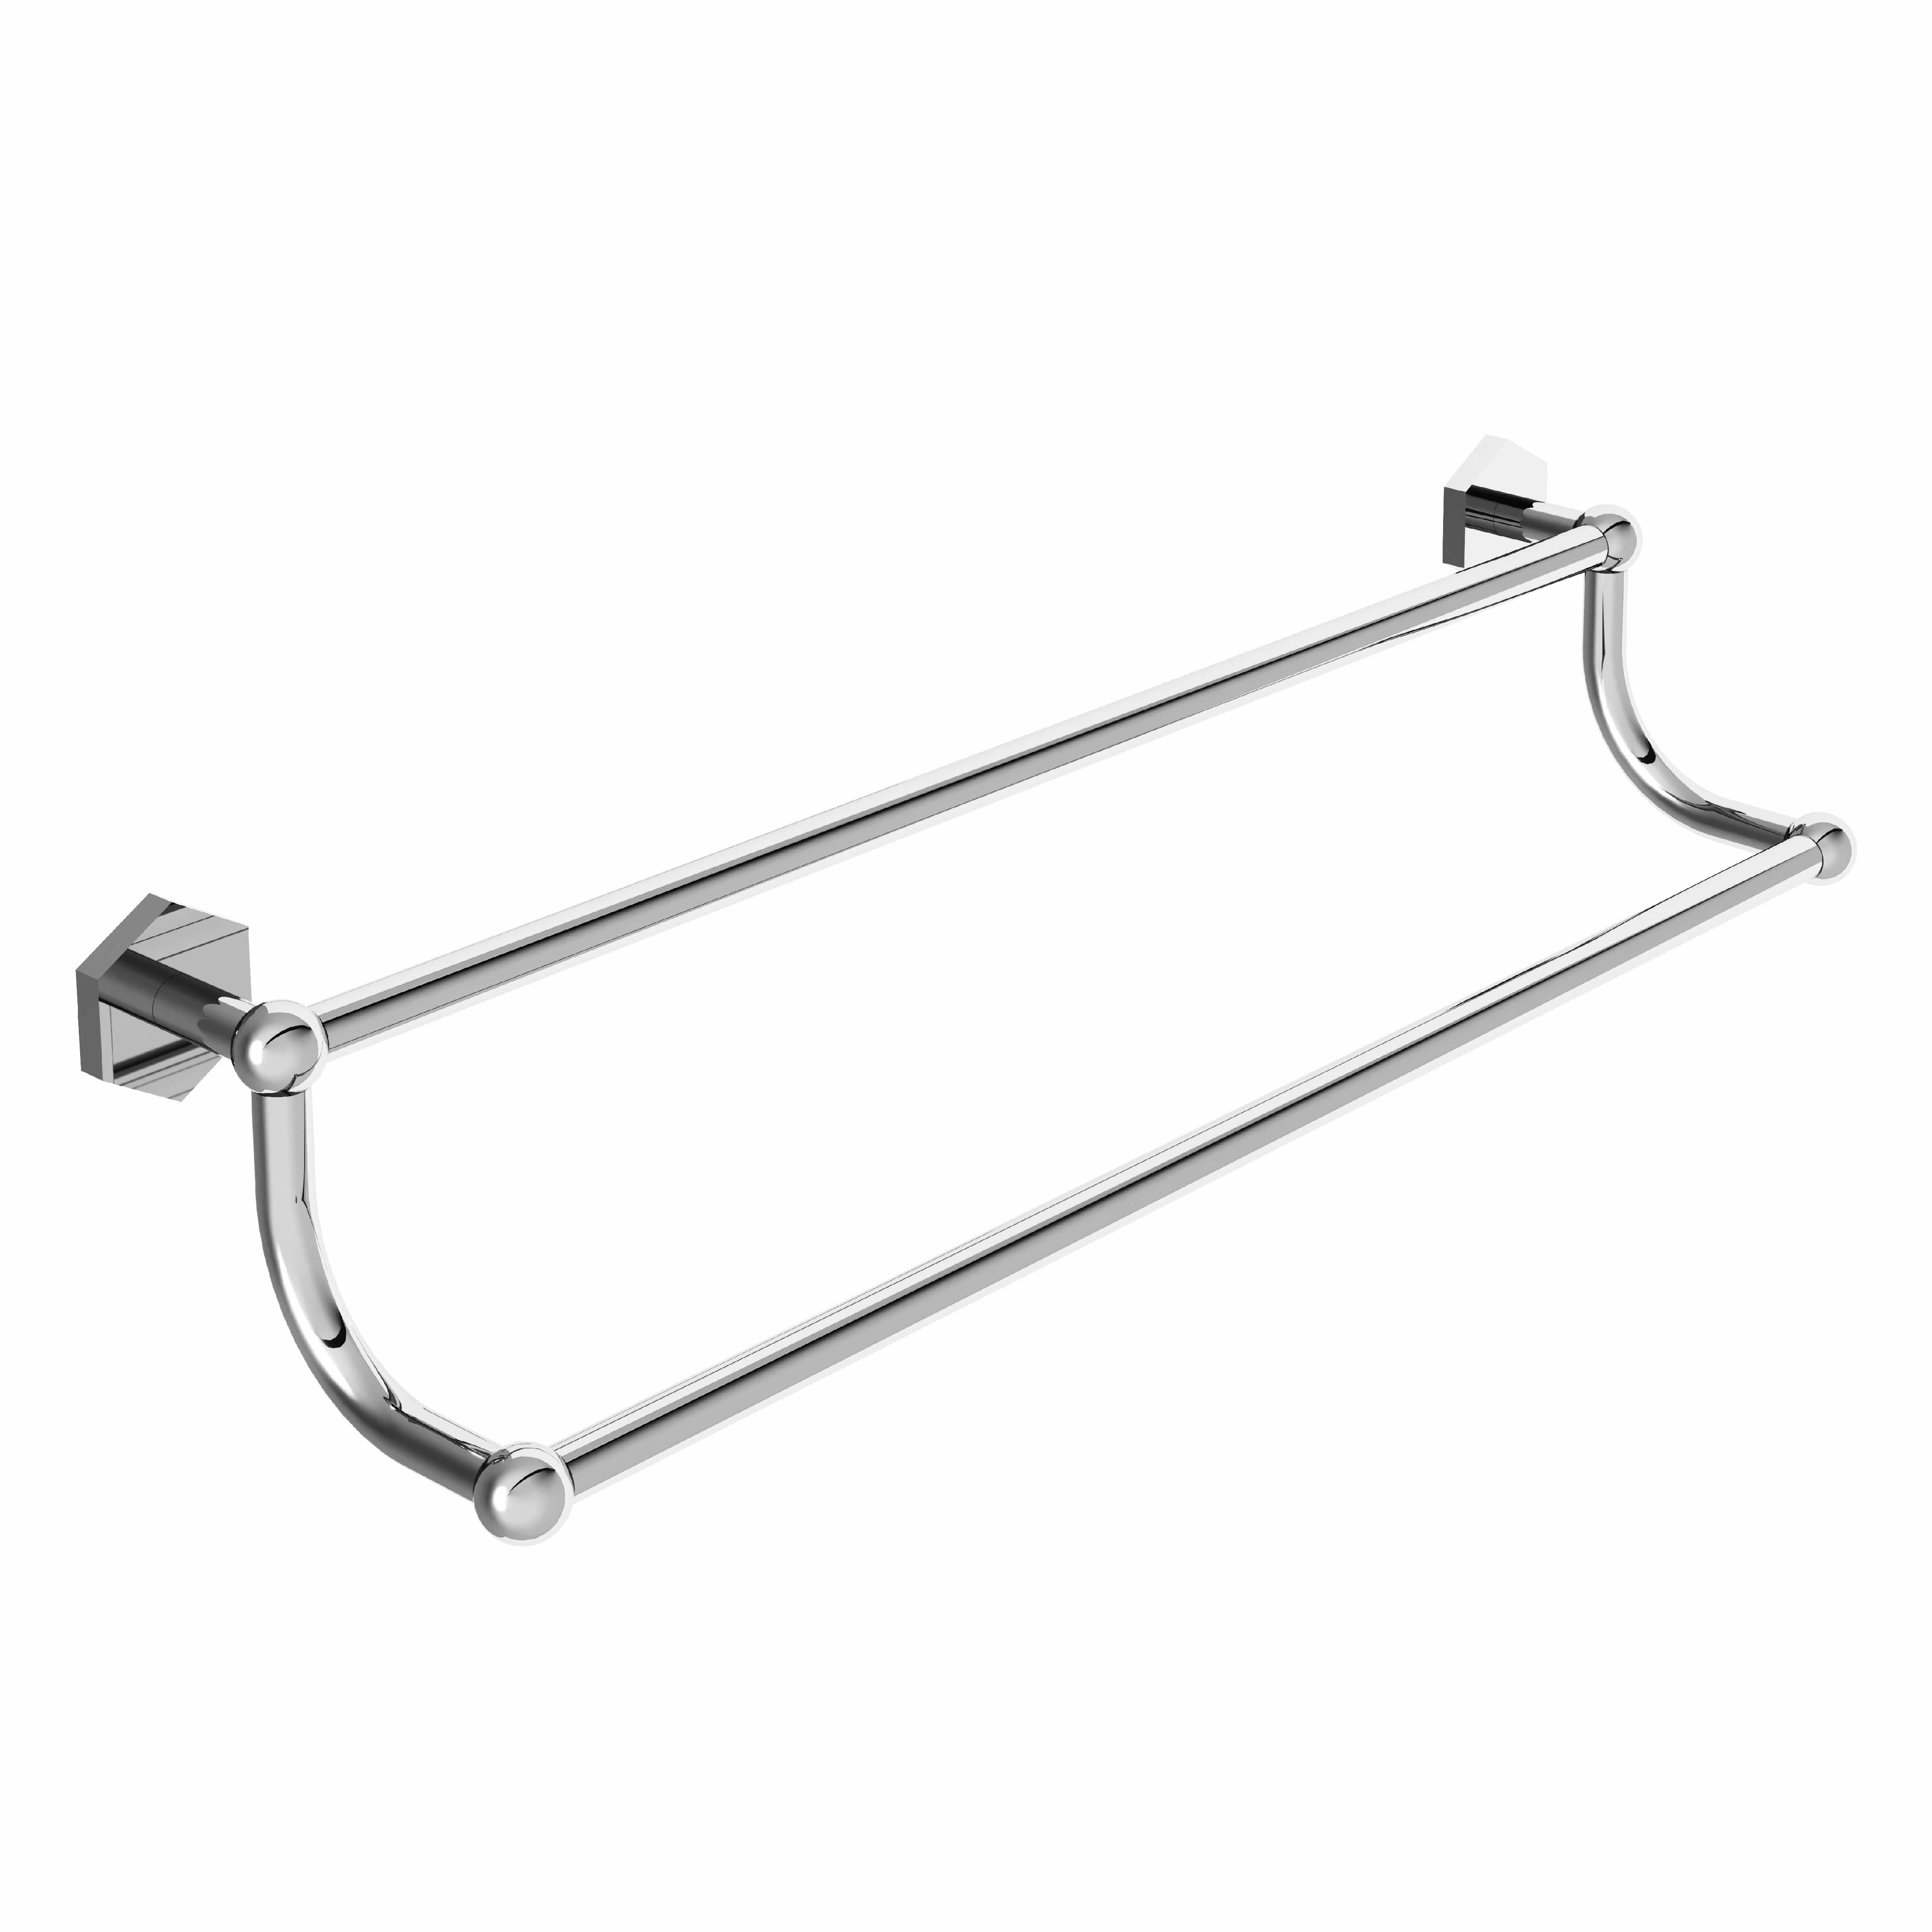 M39-509 Wall mounted double towel bar